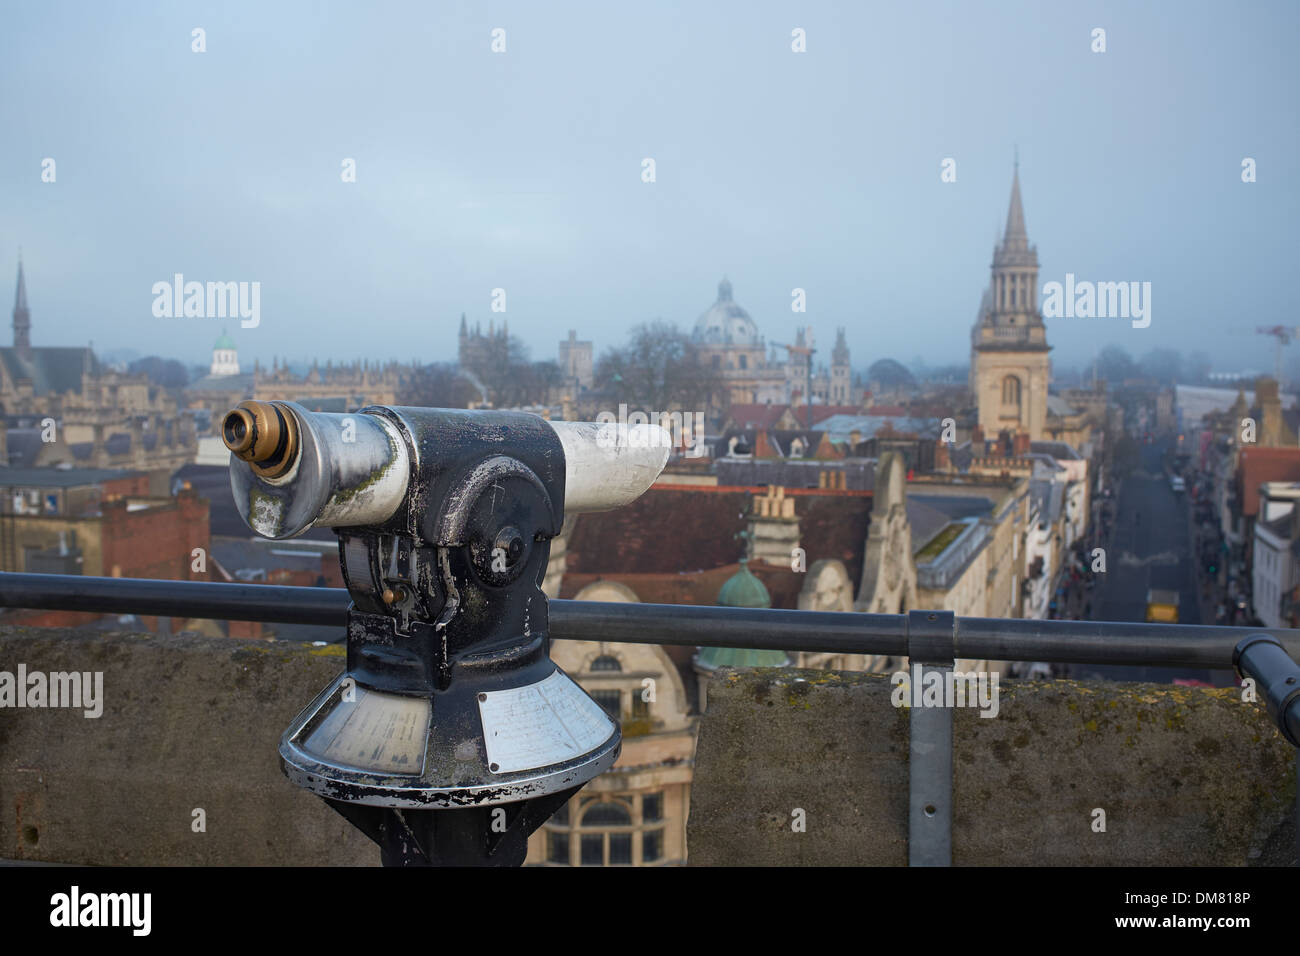 Viewing telescope on the top of Carfax Tower in Oxford city centre Stock Photo